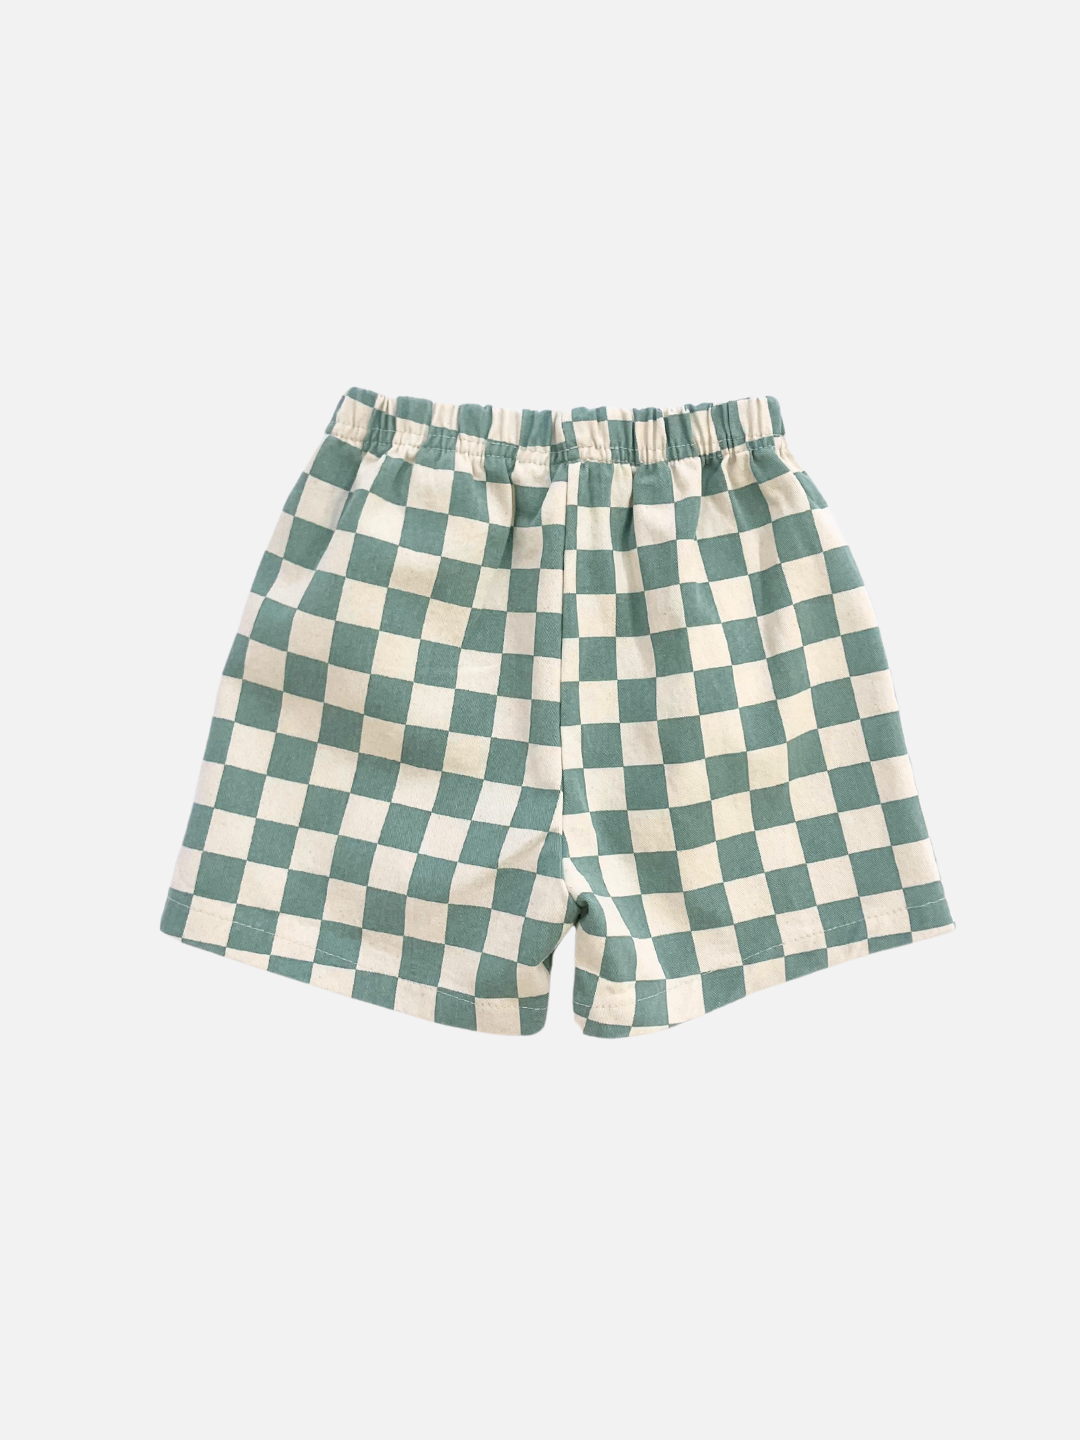 A back view of the kid's Frankie Short in Teal & Ivory check